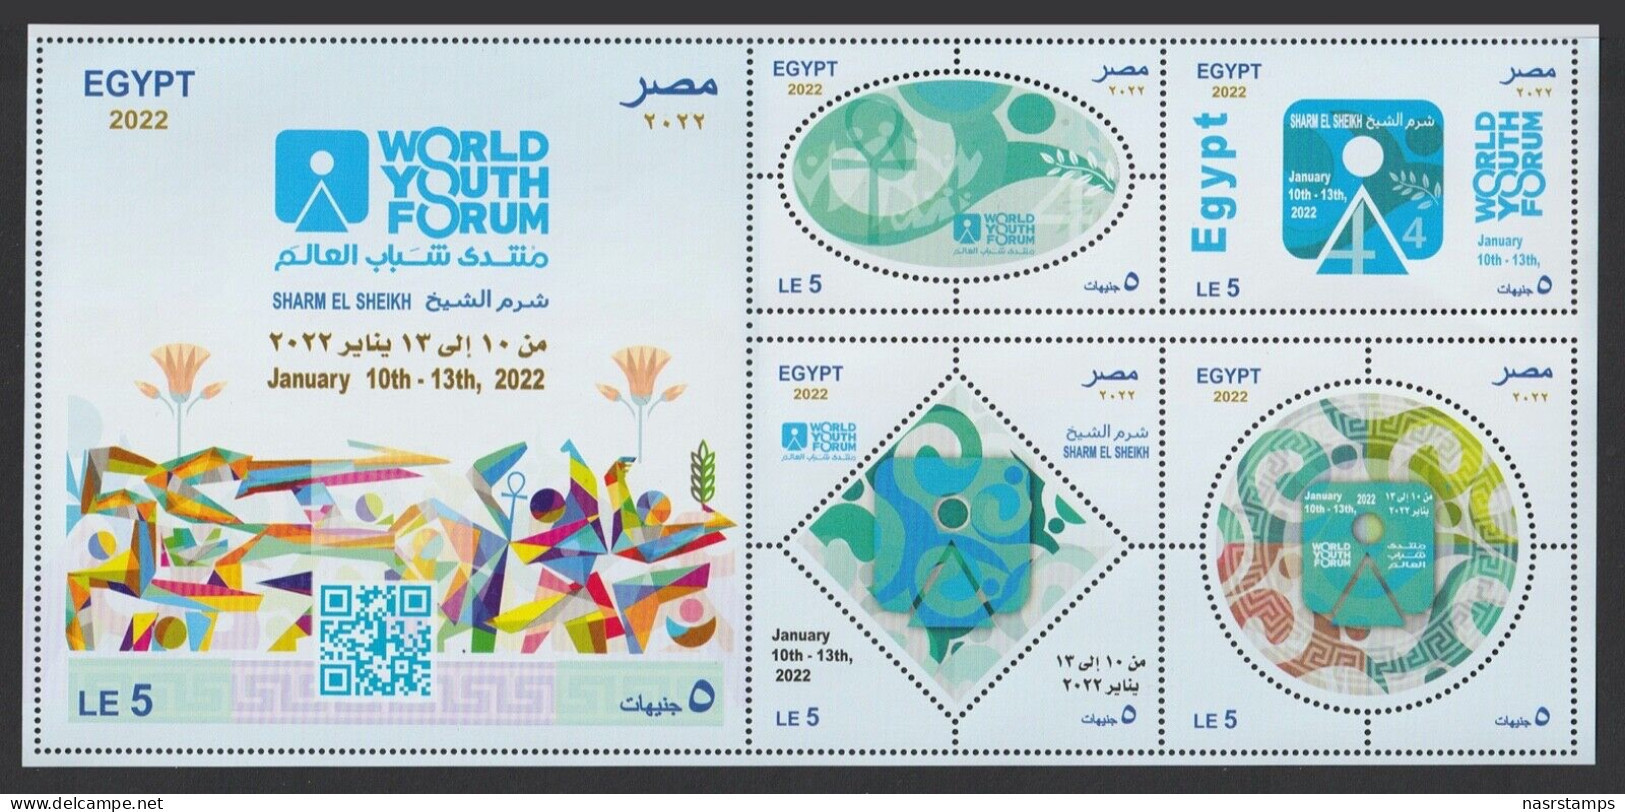 Egypt - 2022/2023 - Complete Set of Issues of 2022/2023 - With S/S - MNH**